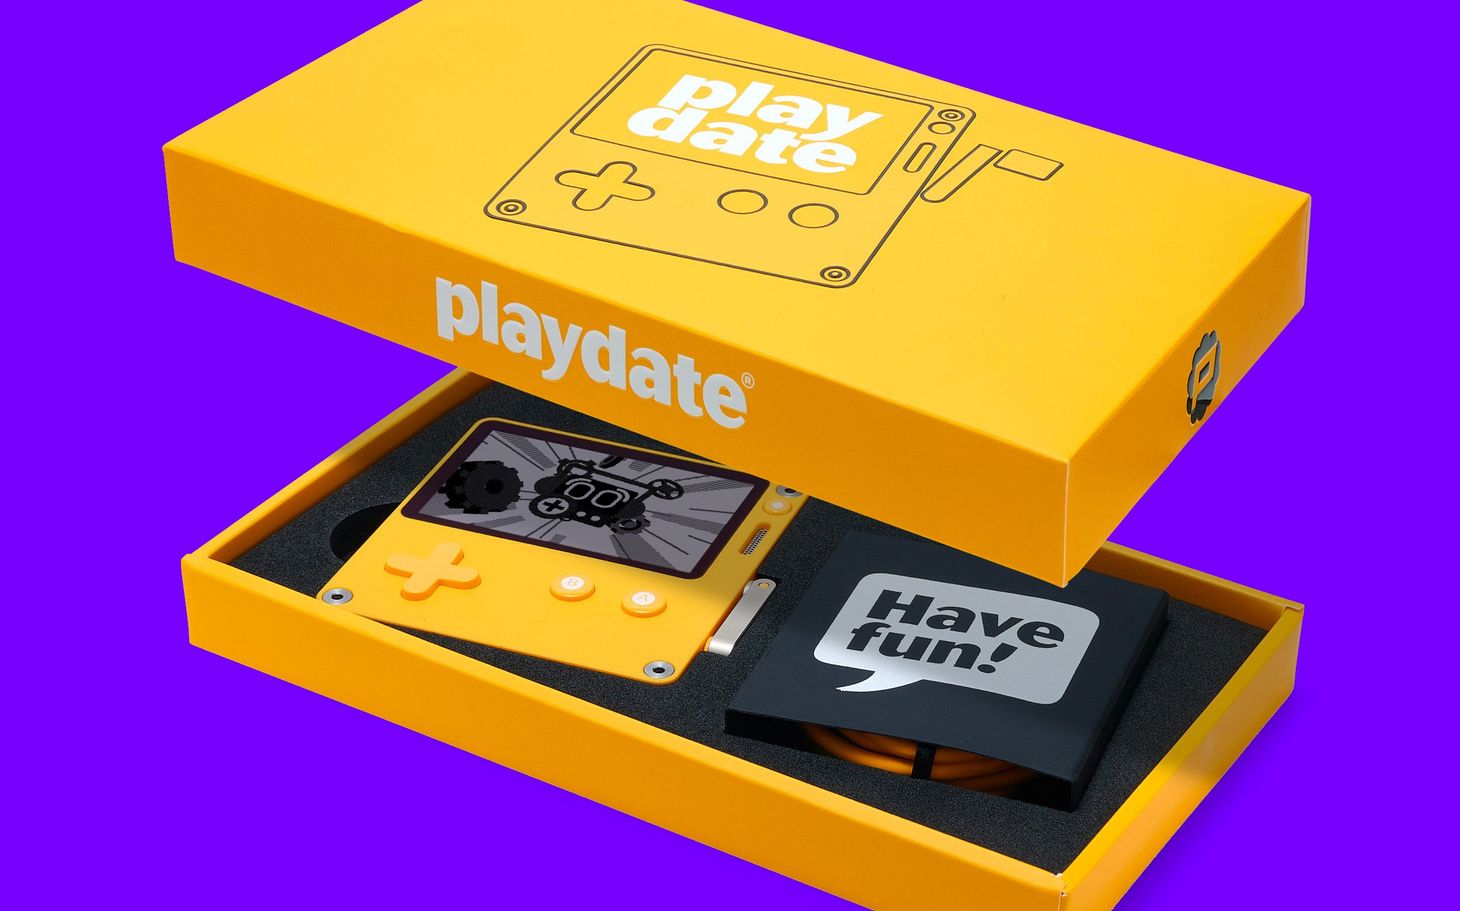 Playdate handheld console unveils Pulp, a free tool for making games